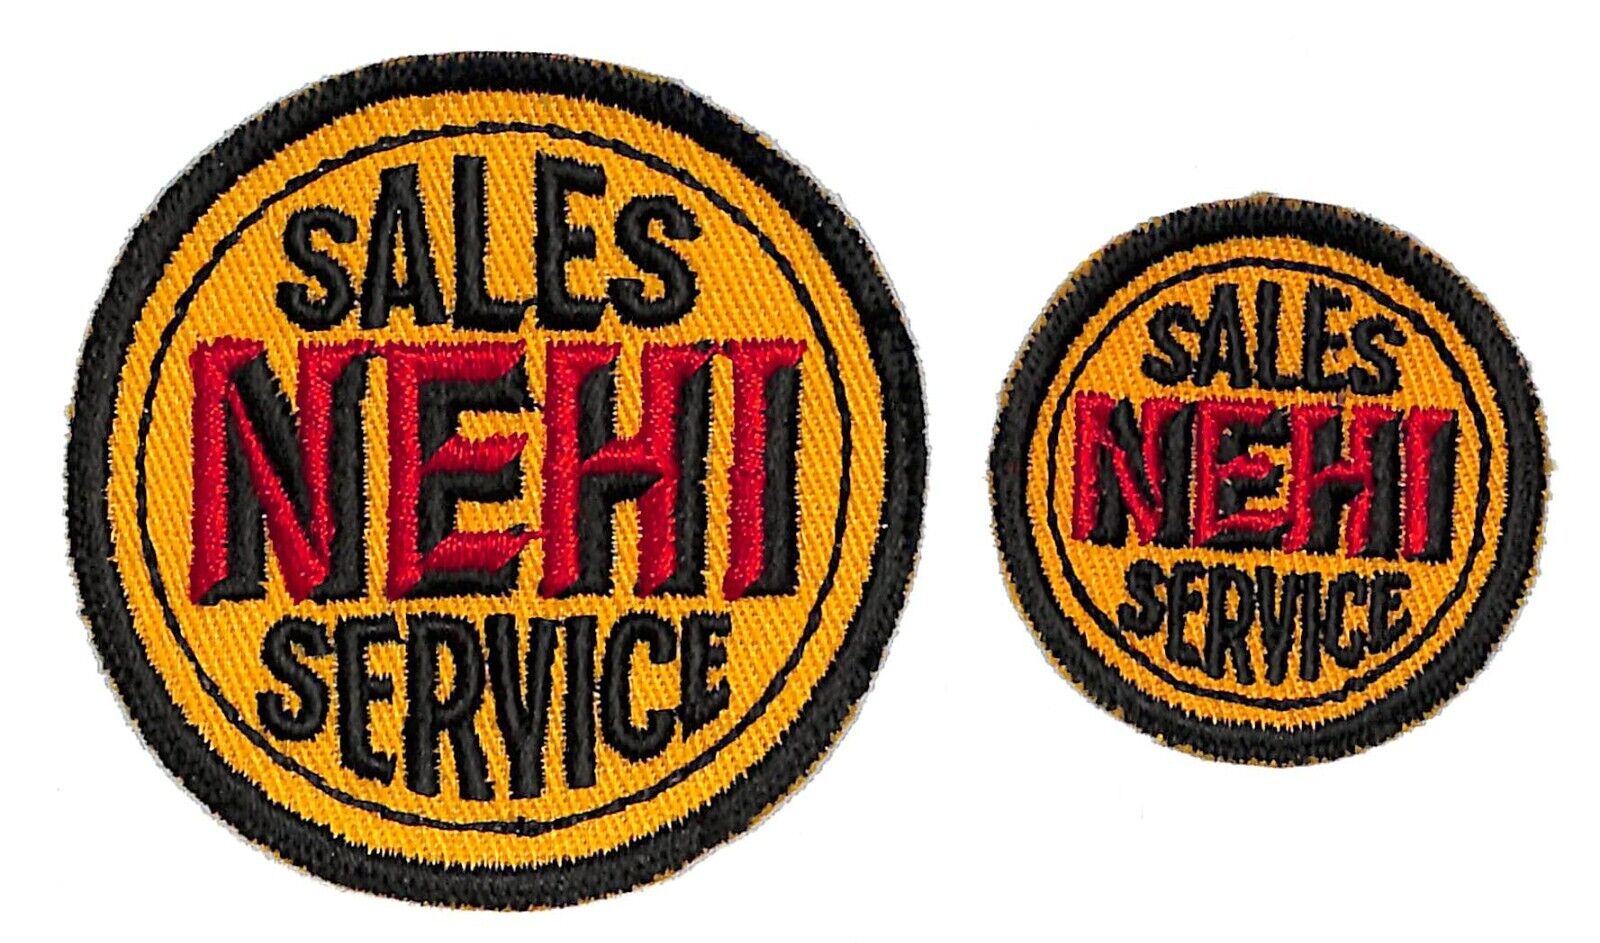 Nehi Sales Service Pair of Embroidered Soda Patches c1940\'s-50s VGC Scarce